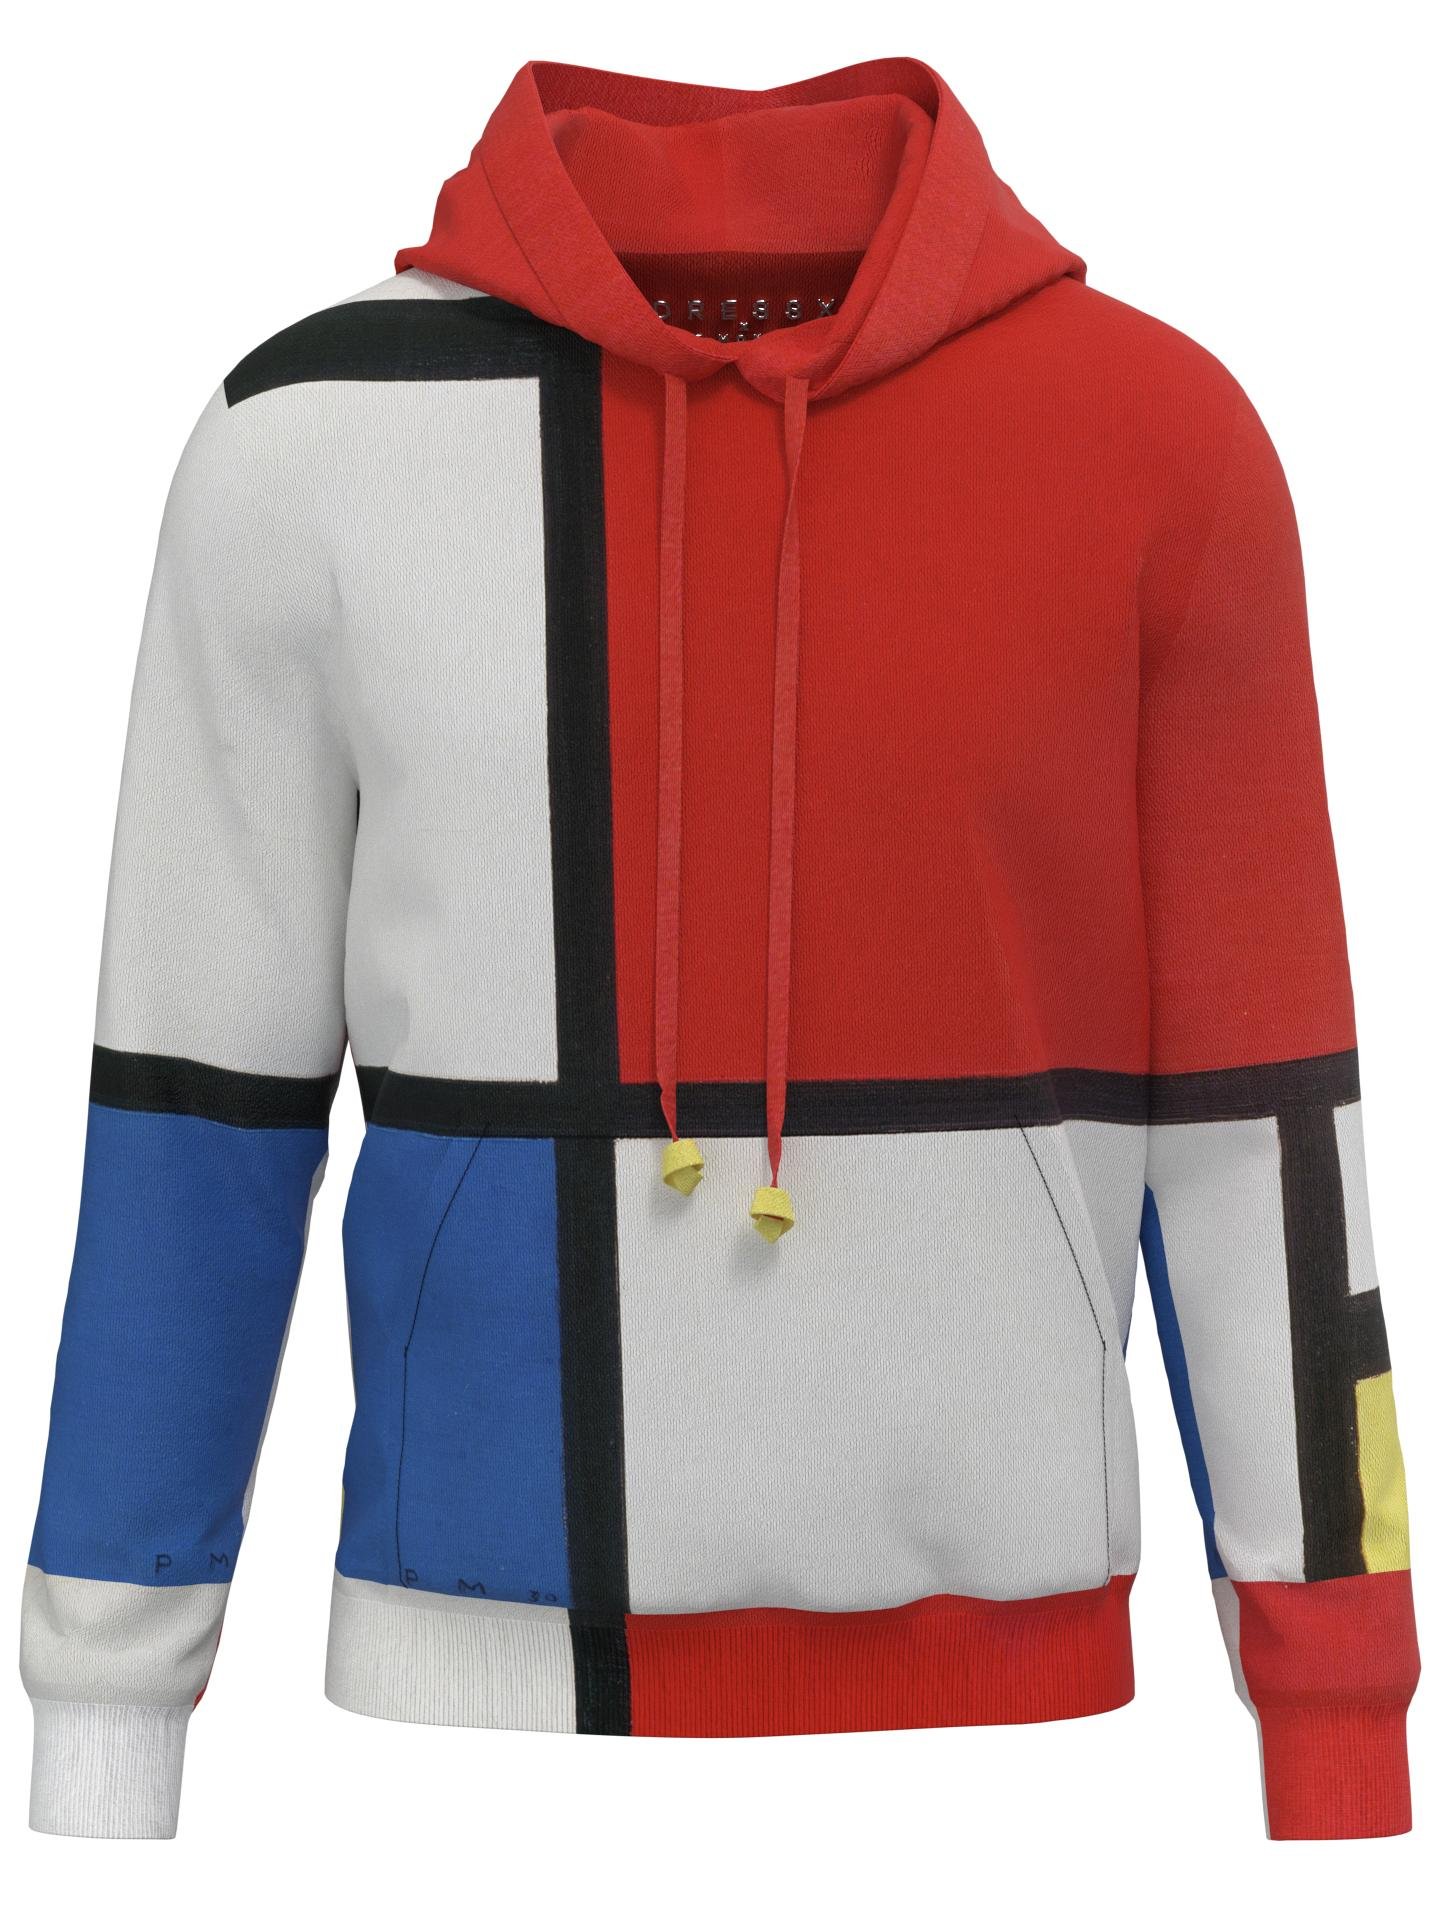 Hoodie-Composition with Red, Blue and Yellow by DRESSX